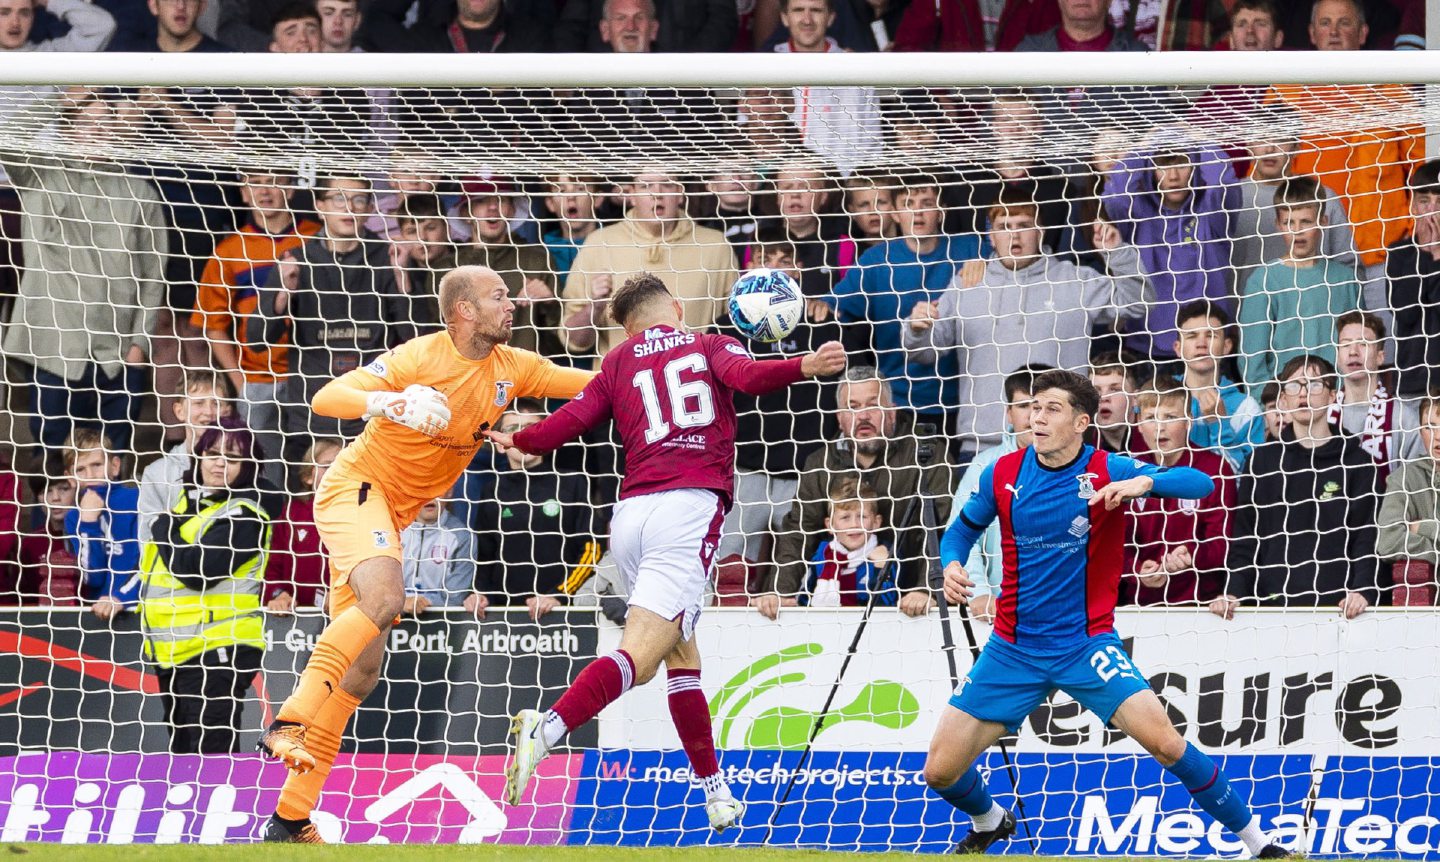 Kiaran Shanks went close for Arbroath at the end.